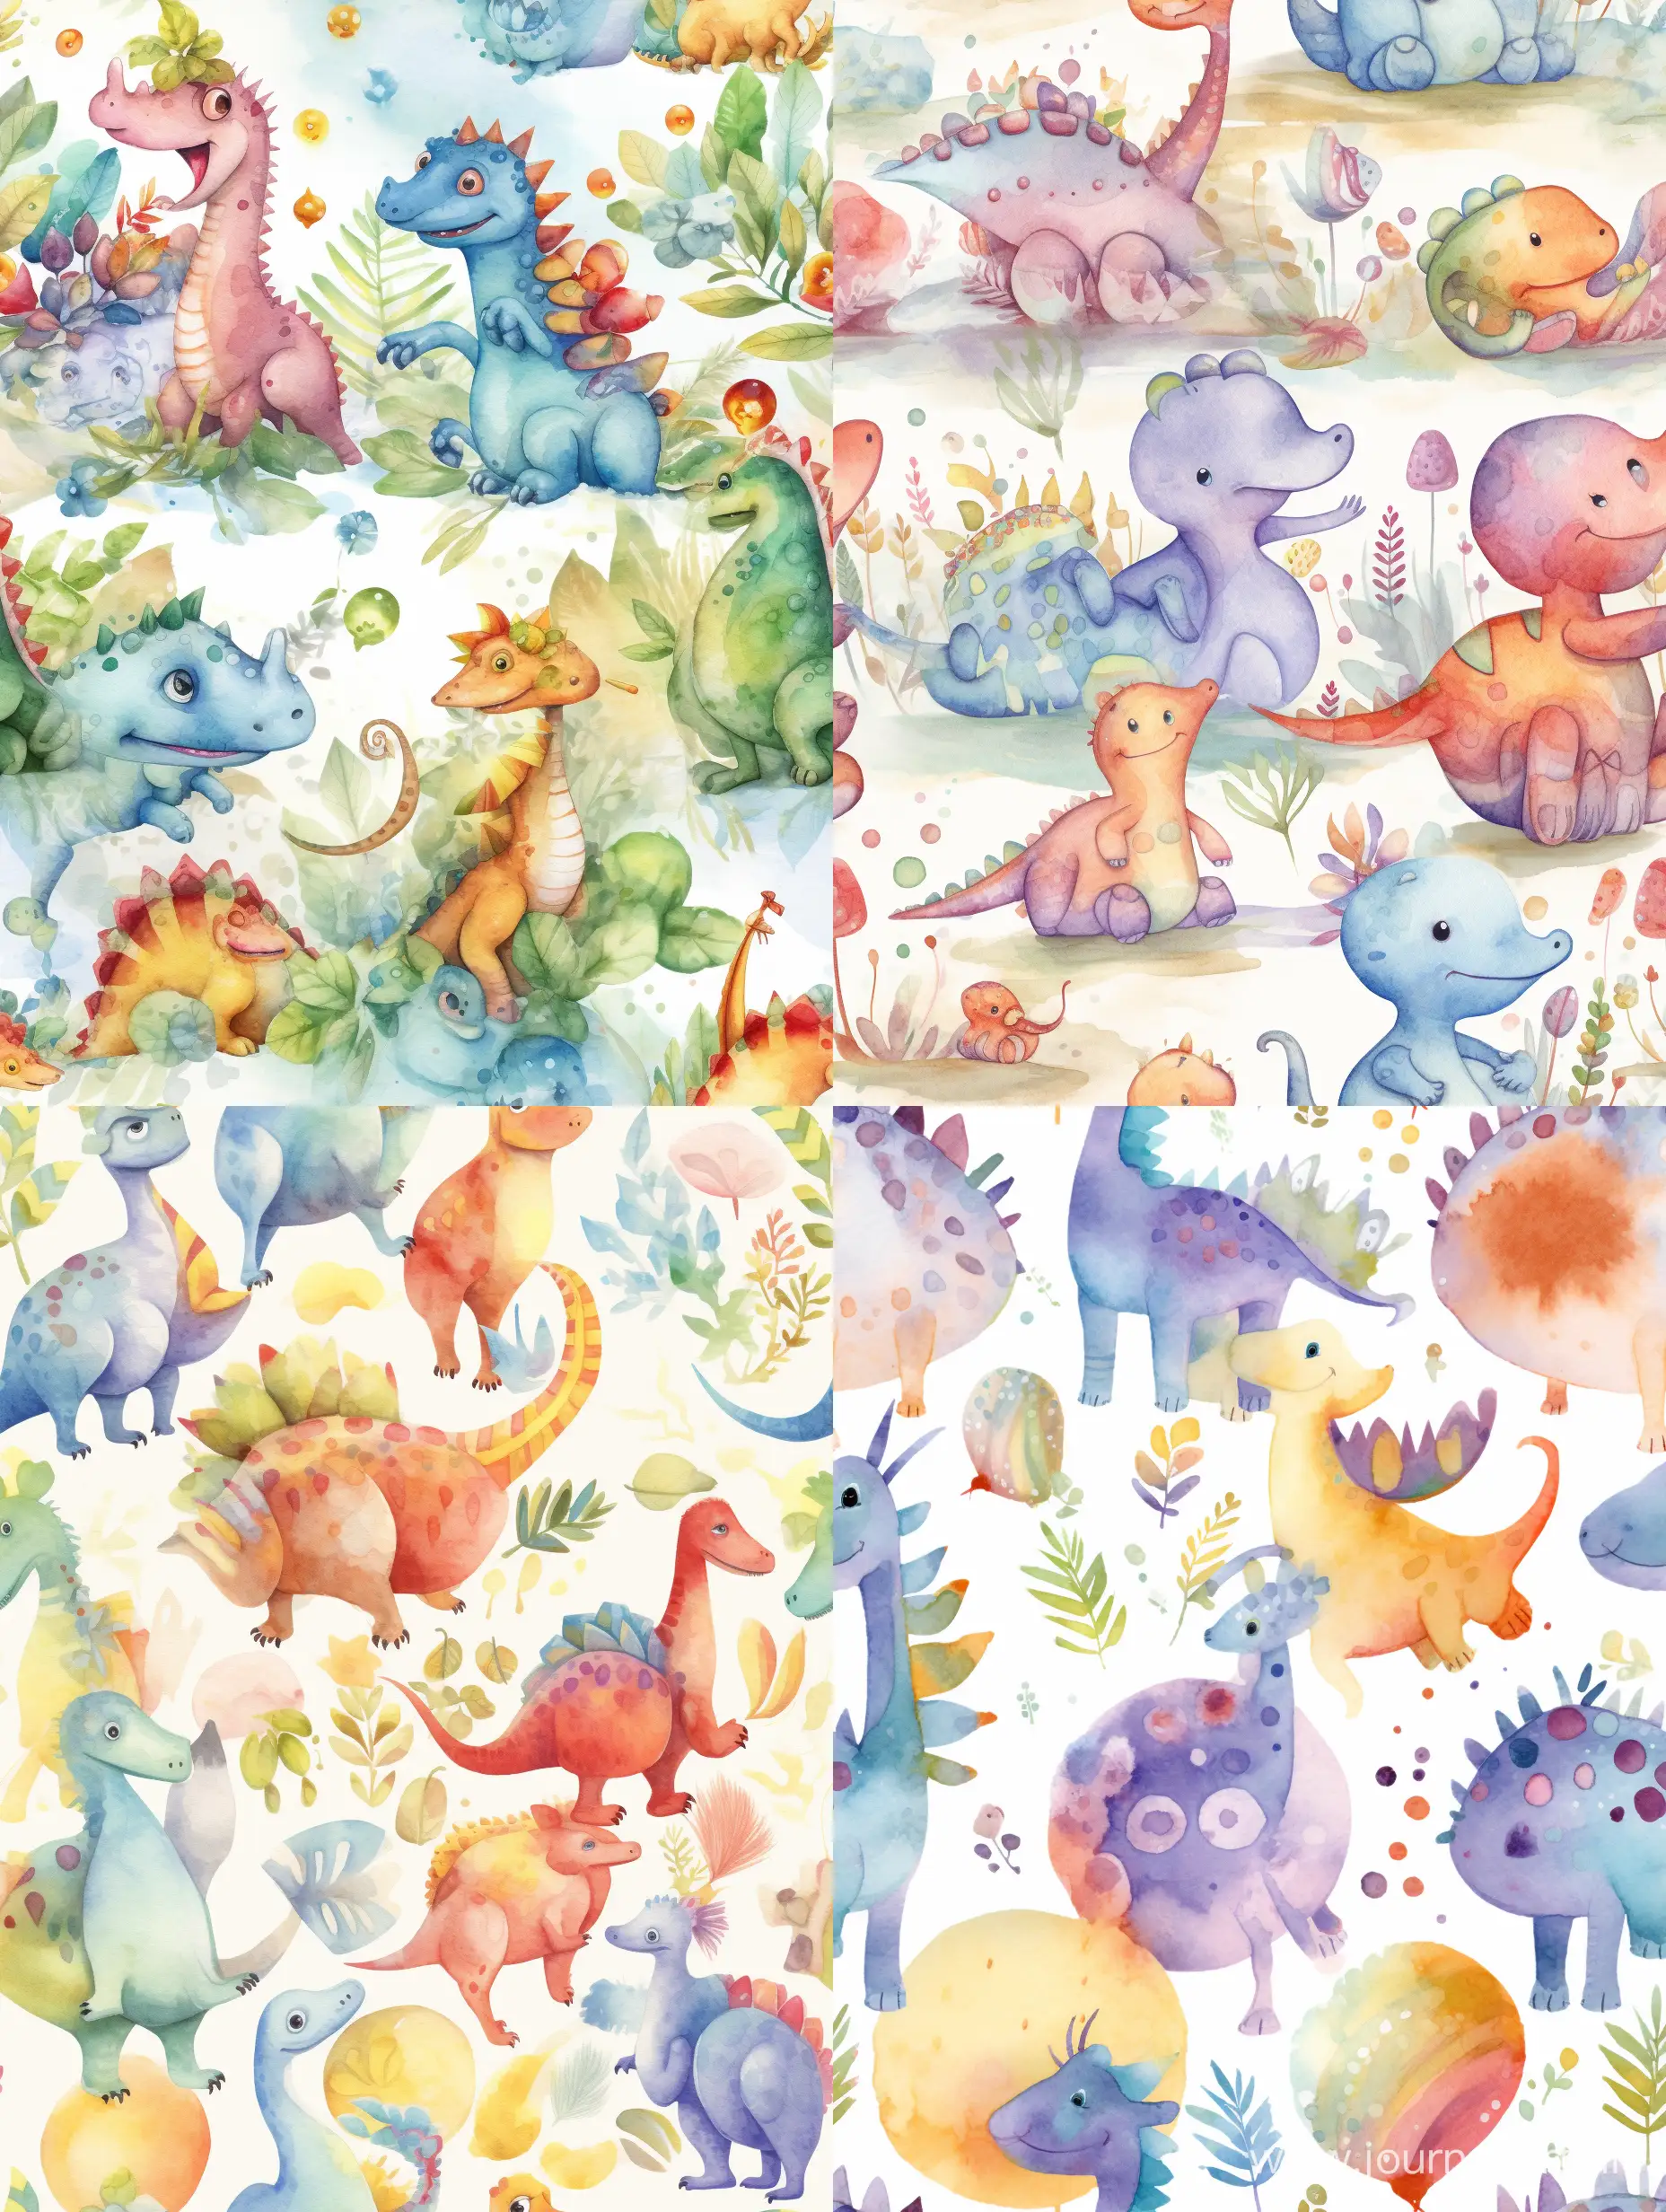 Adorable-SpacedOut-Baby-Dinosaurs-in-Soft-Watercolor-Childrens-Book-Illustration